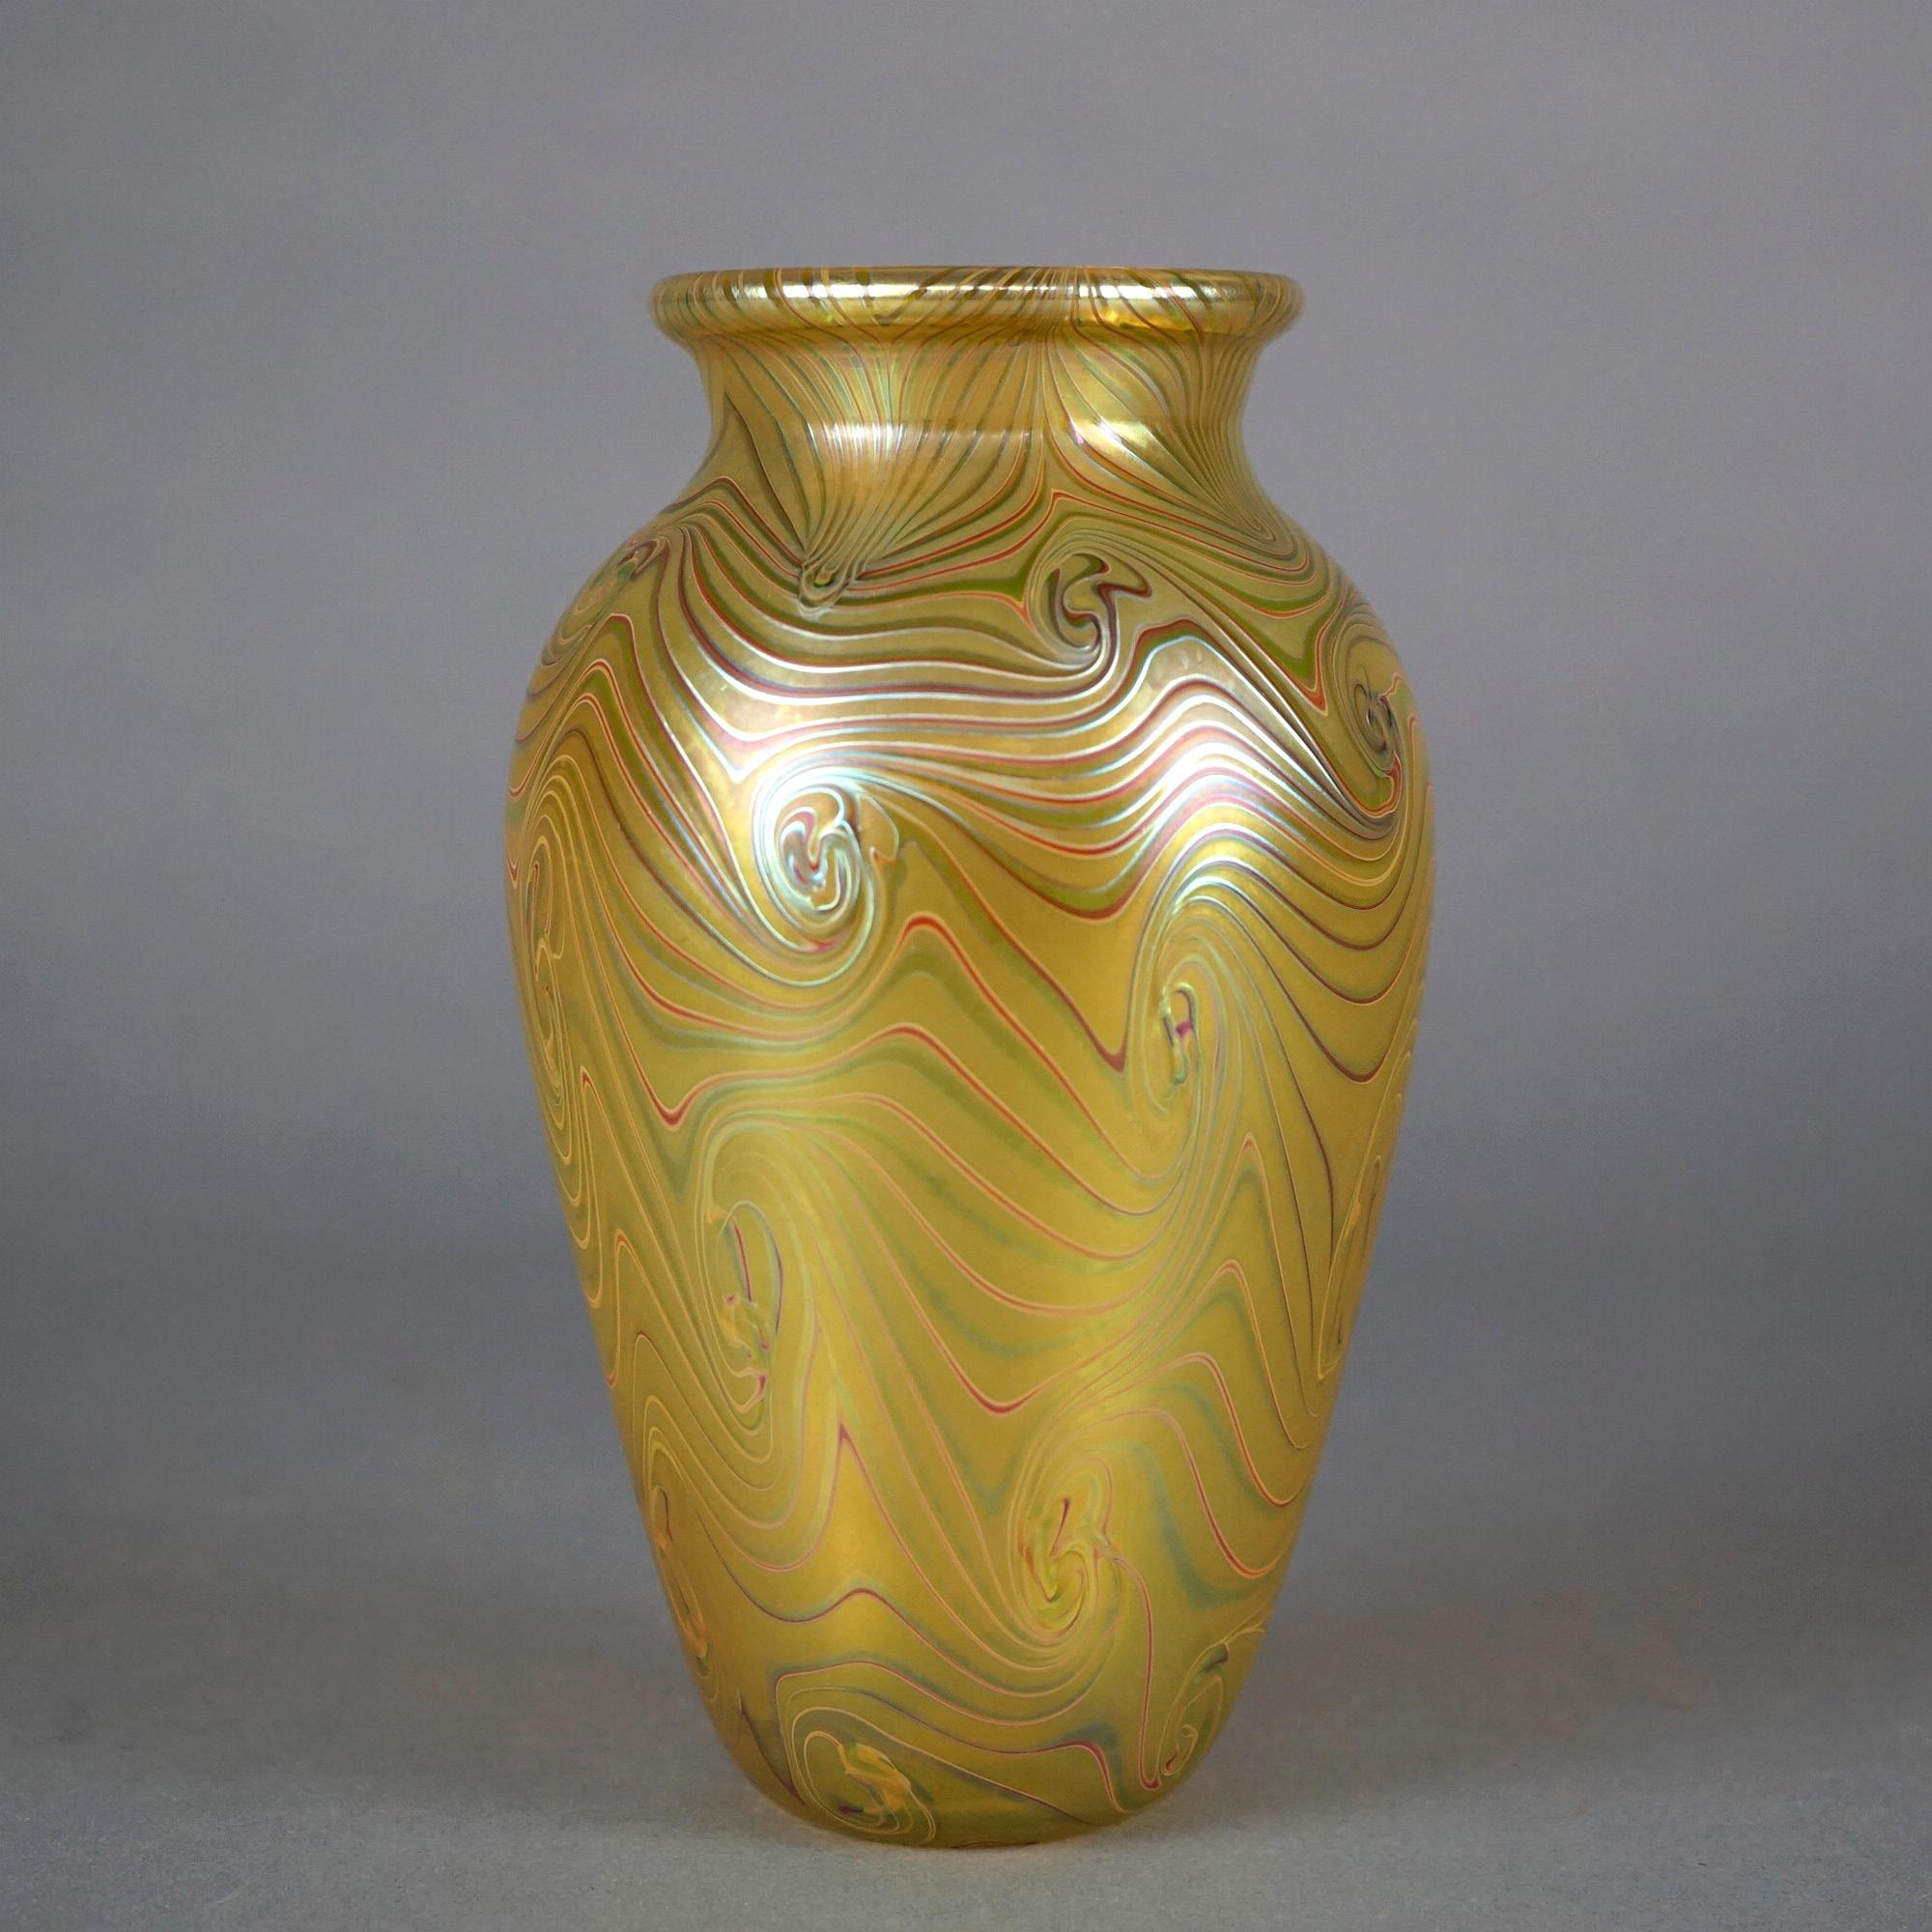 Hand-Crafted Artisan Crafted Orient & Flume Gold & Chocolate Art Glass Vase, Signed, 20th C